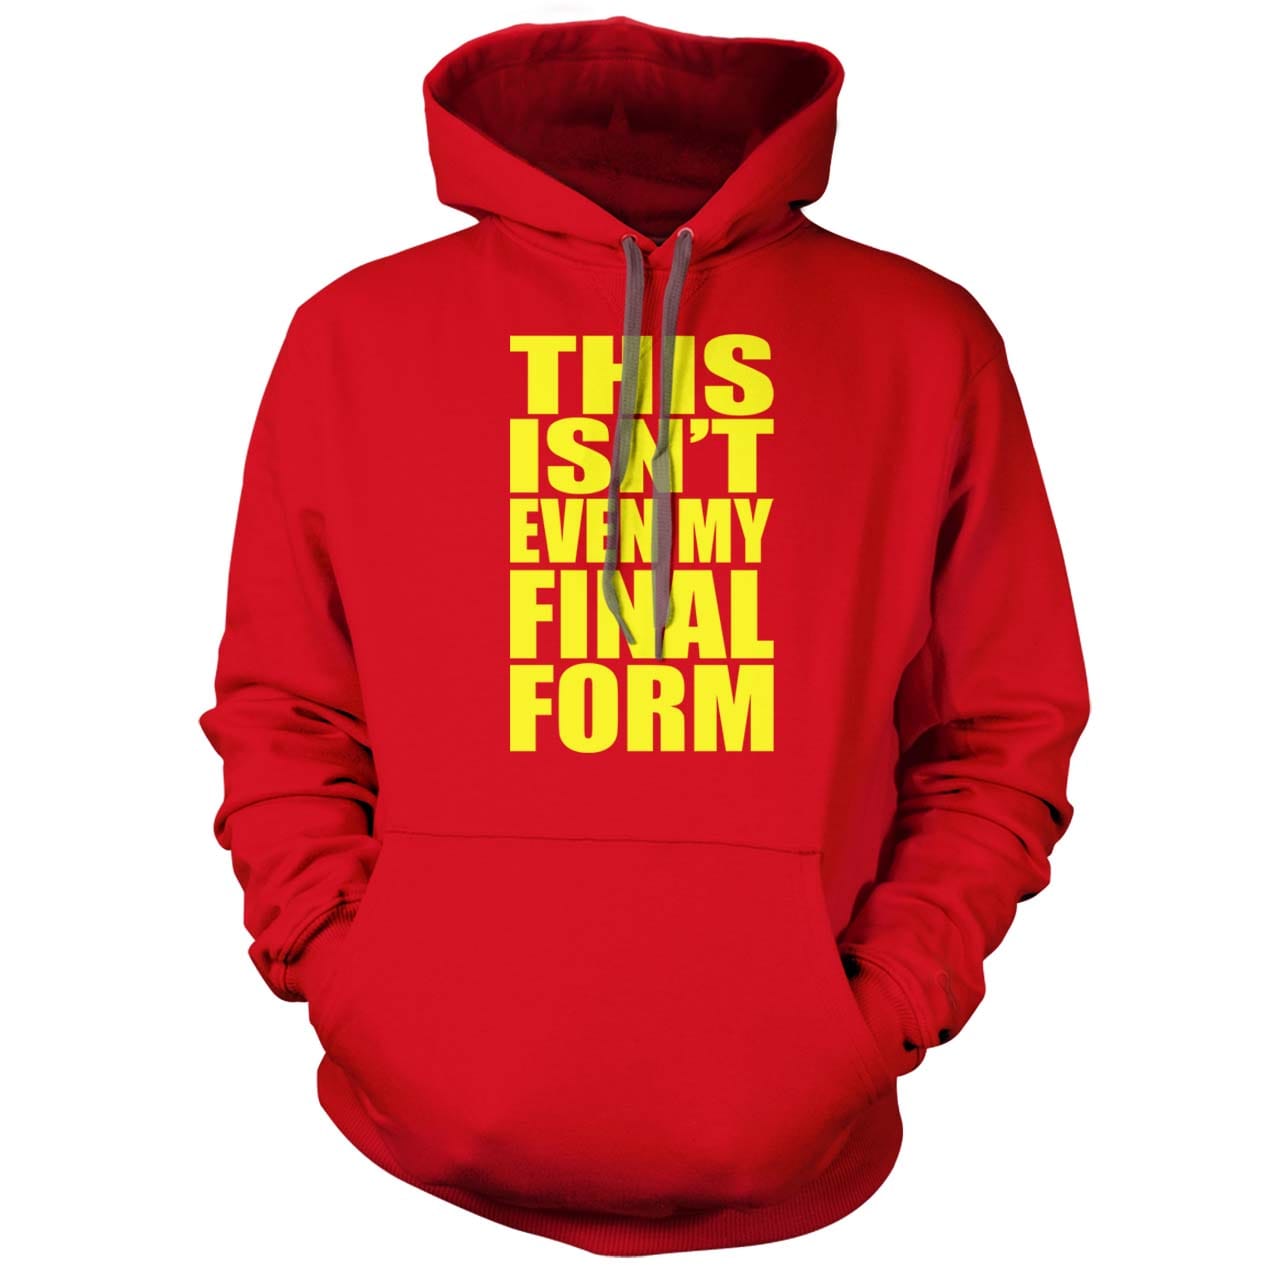 This isn't even my Final Form Hoodie